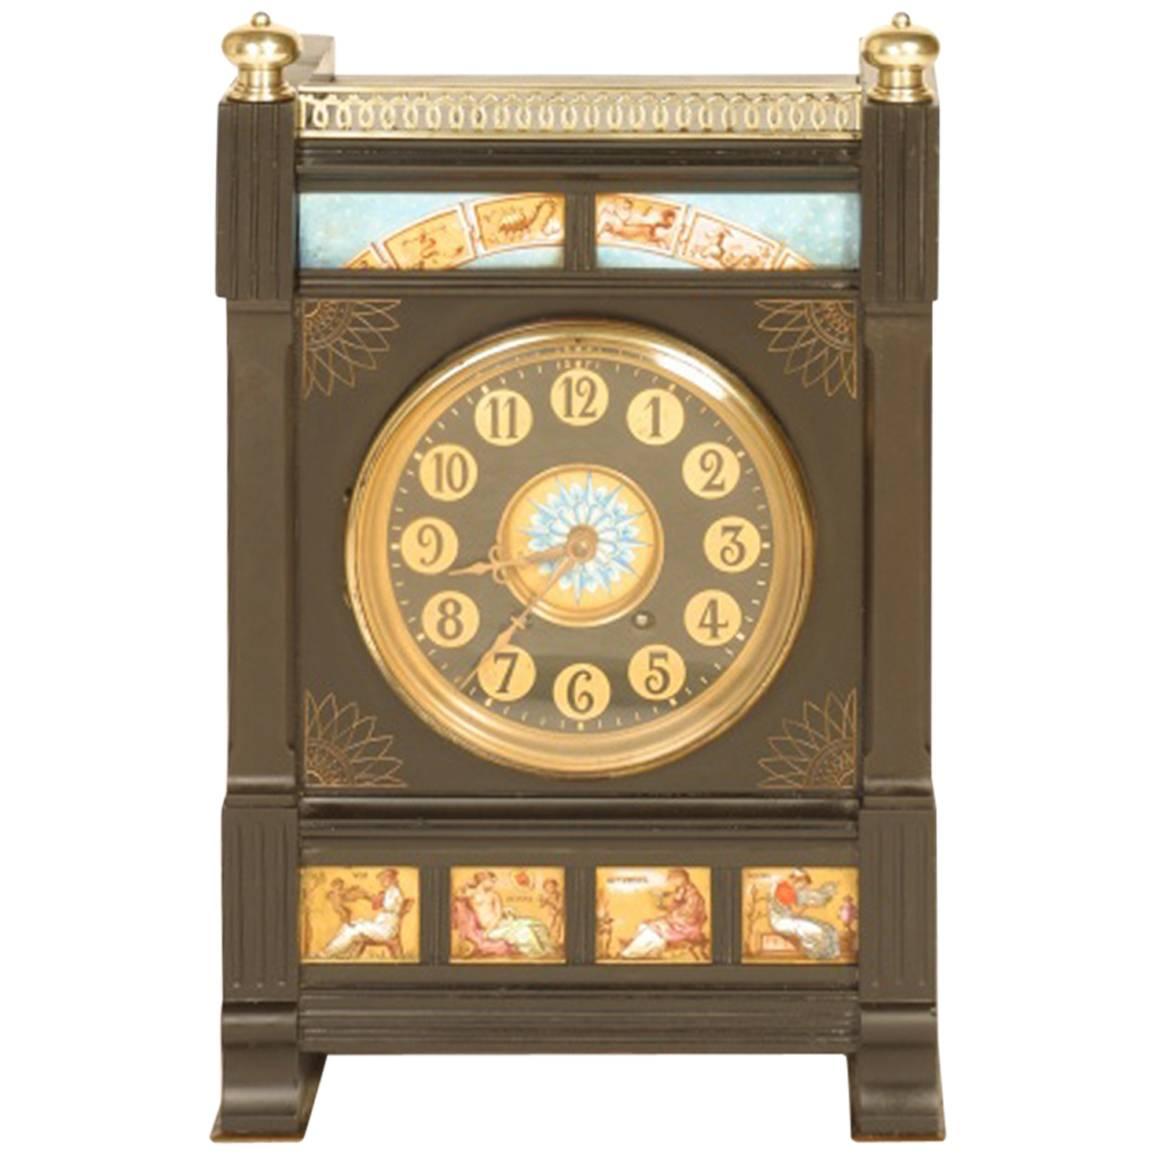 Aesthetic Movement Zodiac Black Marble Mantle Clock with Gong-Striking Movement For Sale